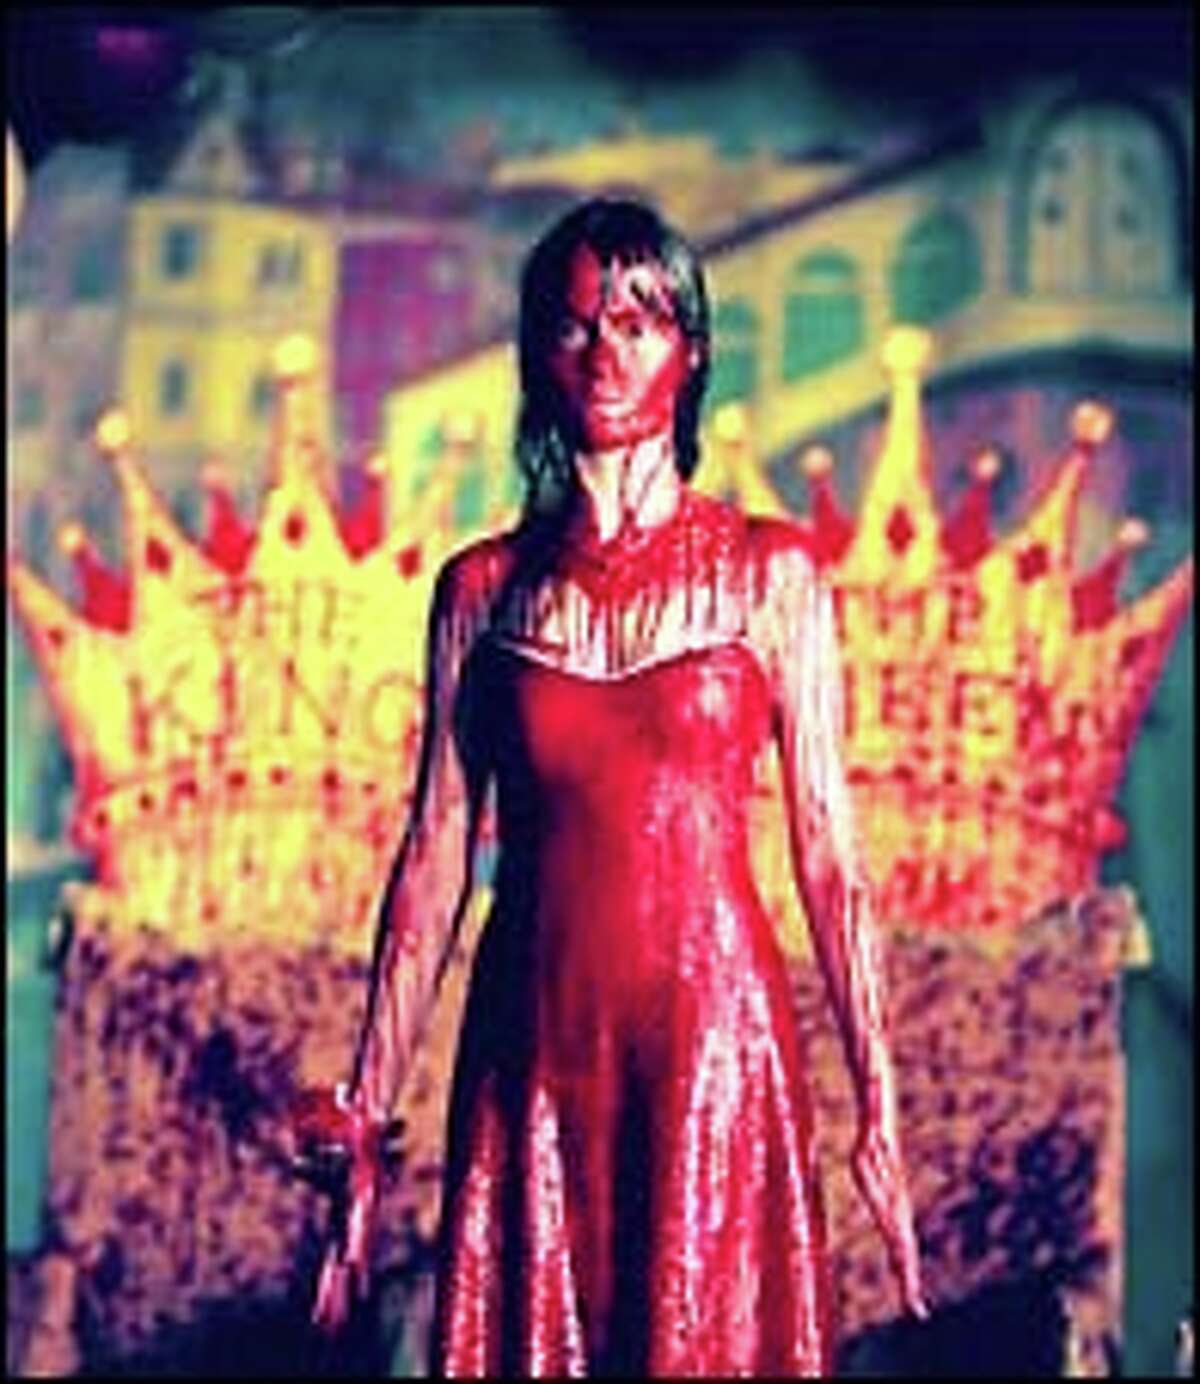 A made for TV version of “Carrie,” of the same name, was produced in 2002, but went no further as plans for the TV series to follow never manifested.